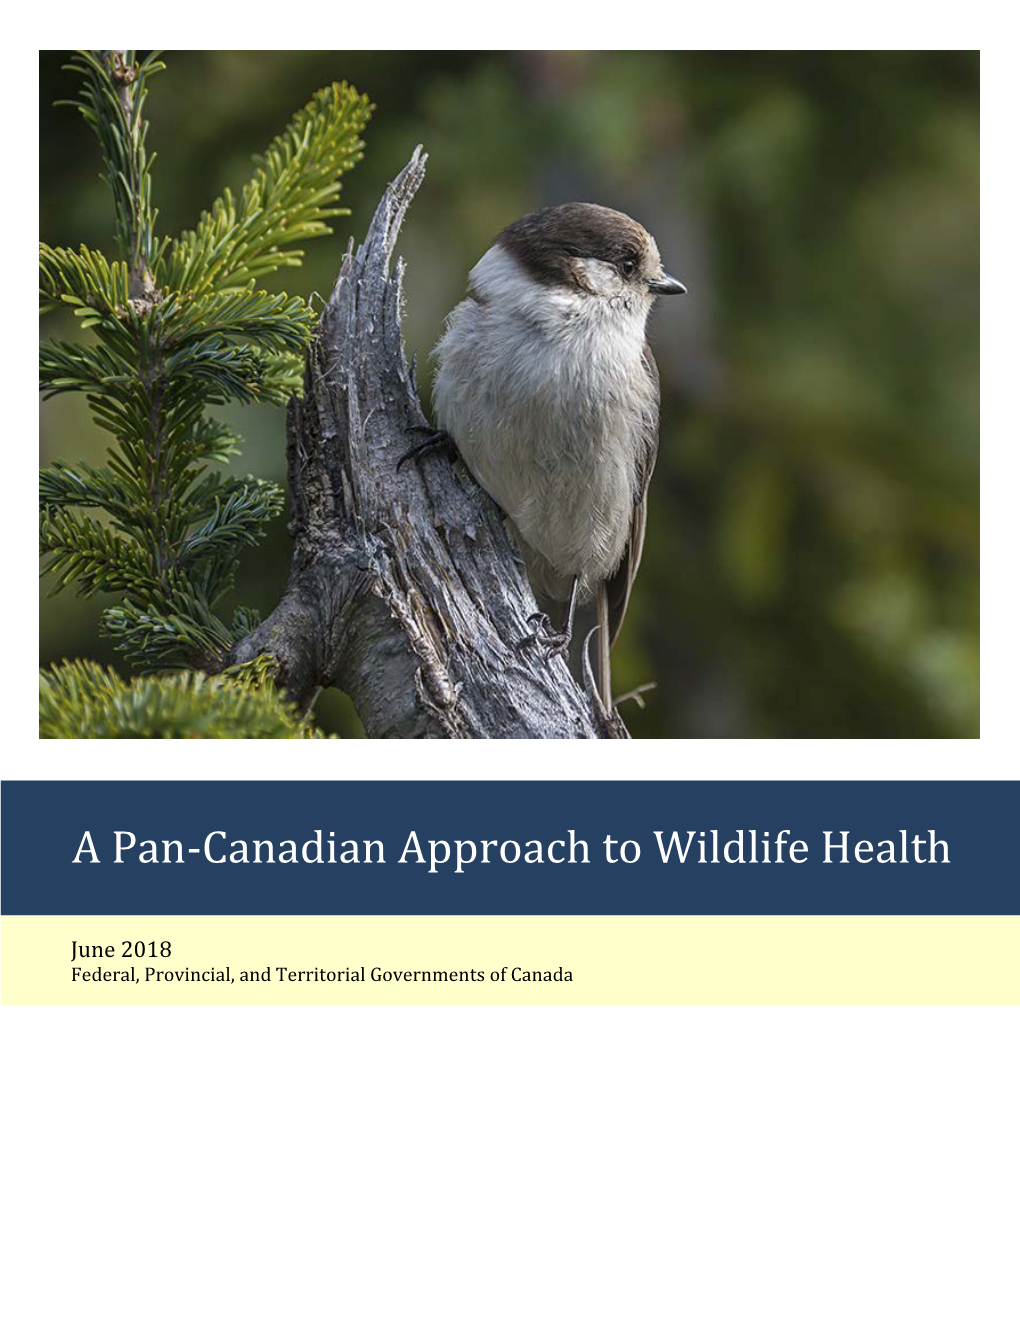 A Pan-Canadian Approach to Wildlife Health